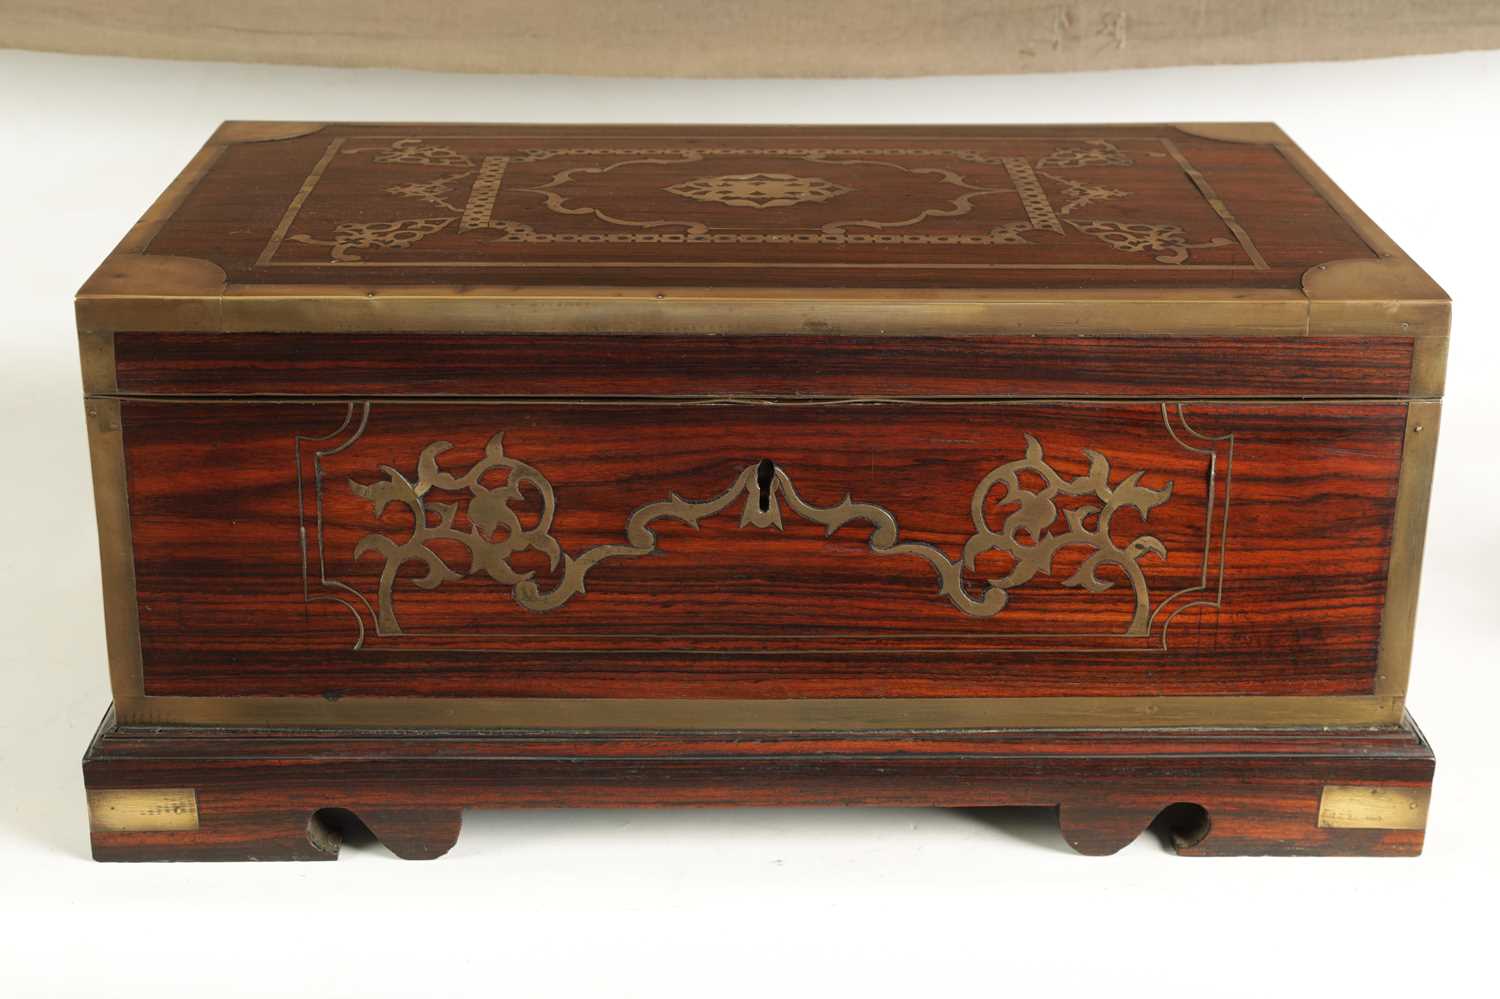 AN 18TH/EARLY 19TH CENTURY BRASS INLAID ANGLO INDIAN HARDWOOD FITTED BOX - Image 4 of 9